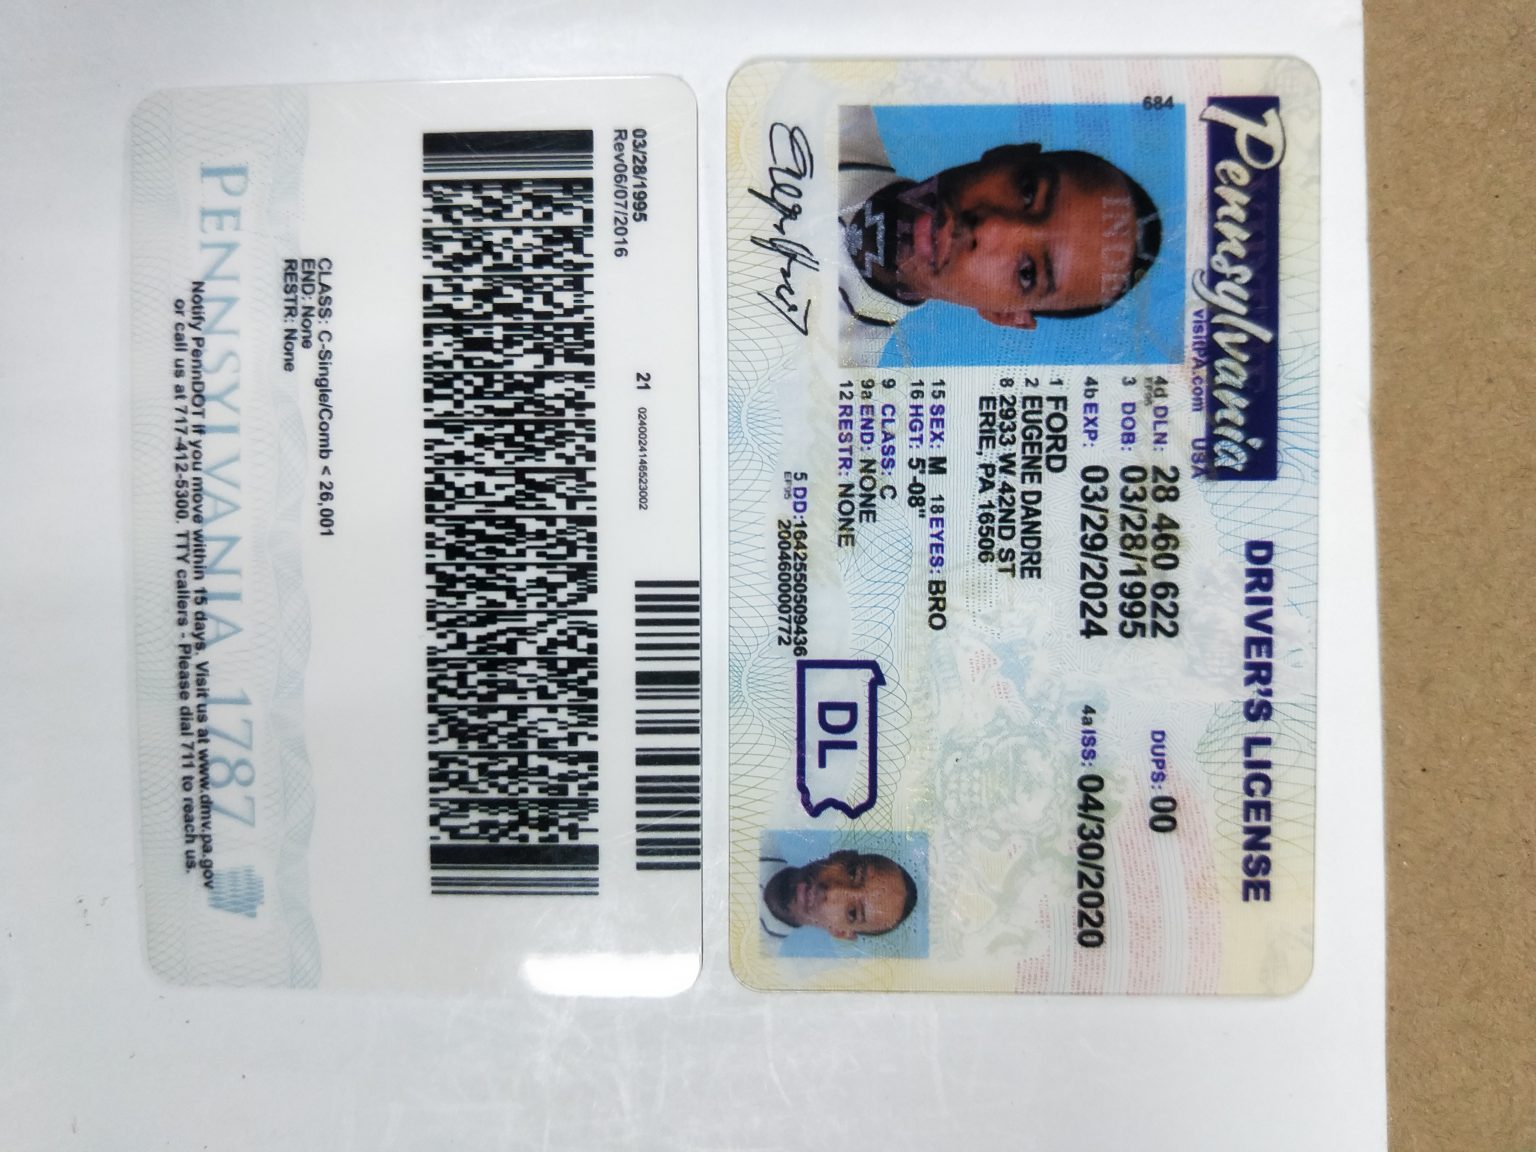 generic id cards or fake id cards